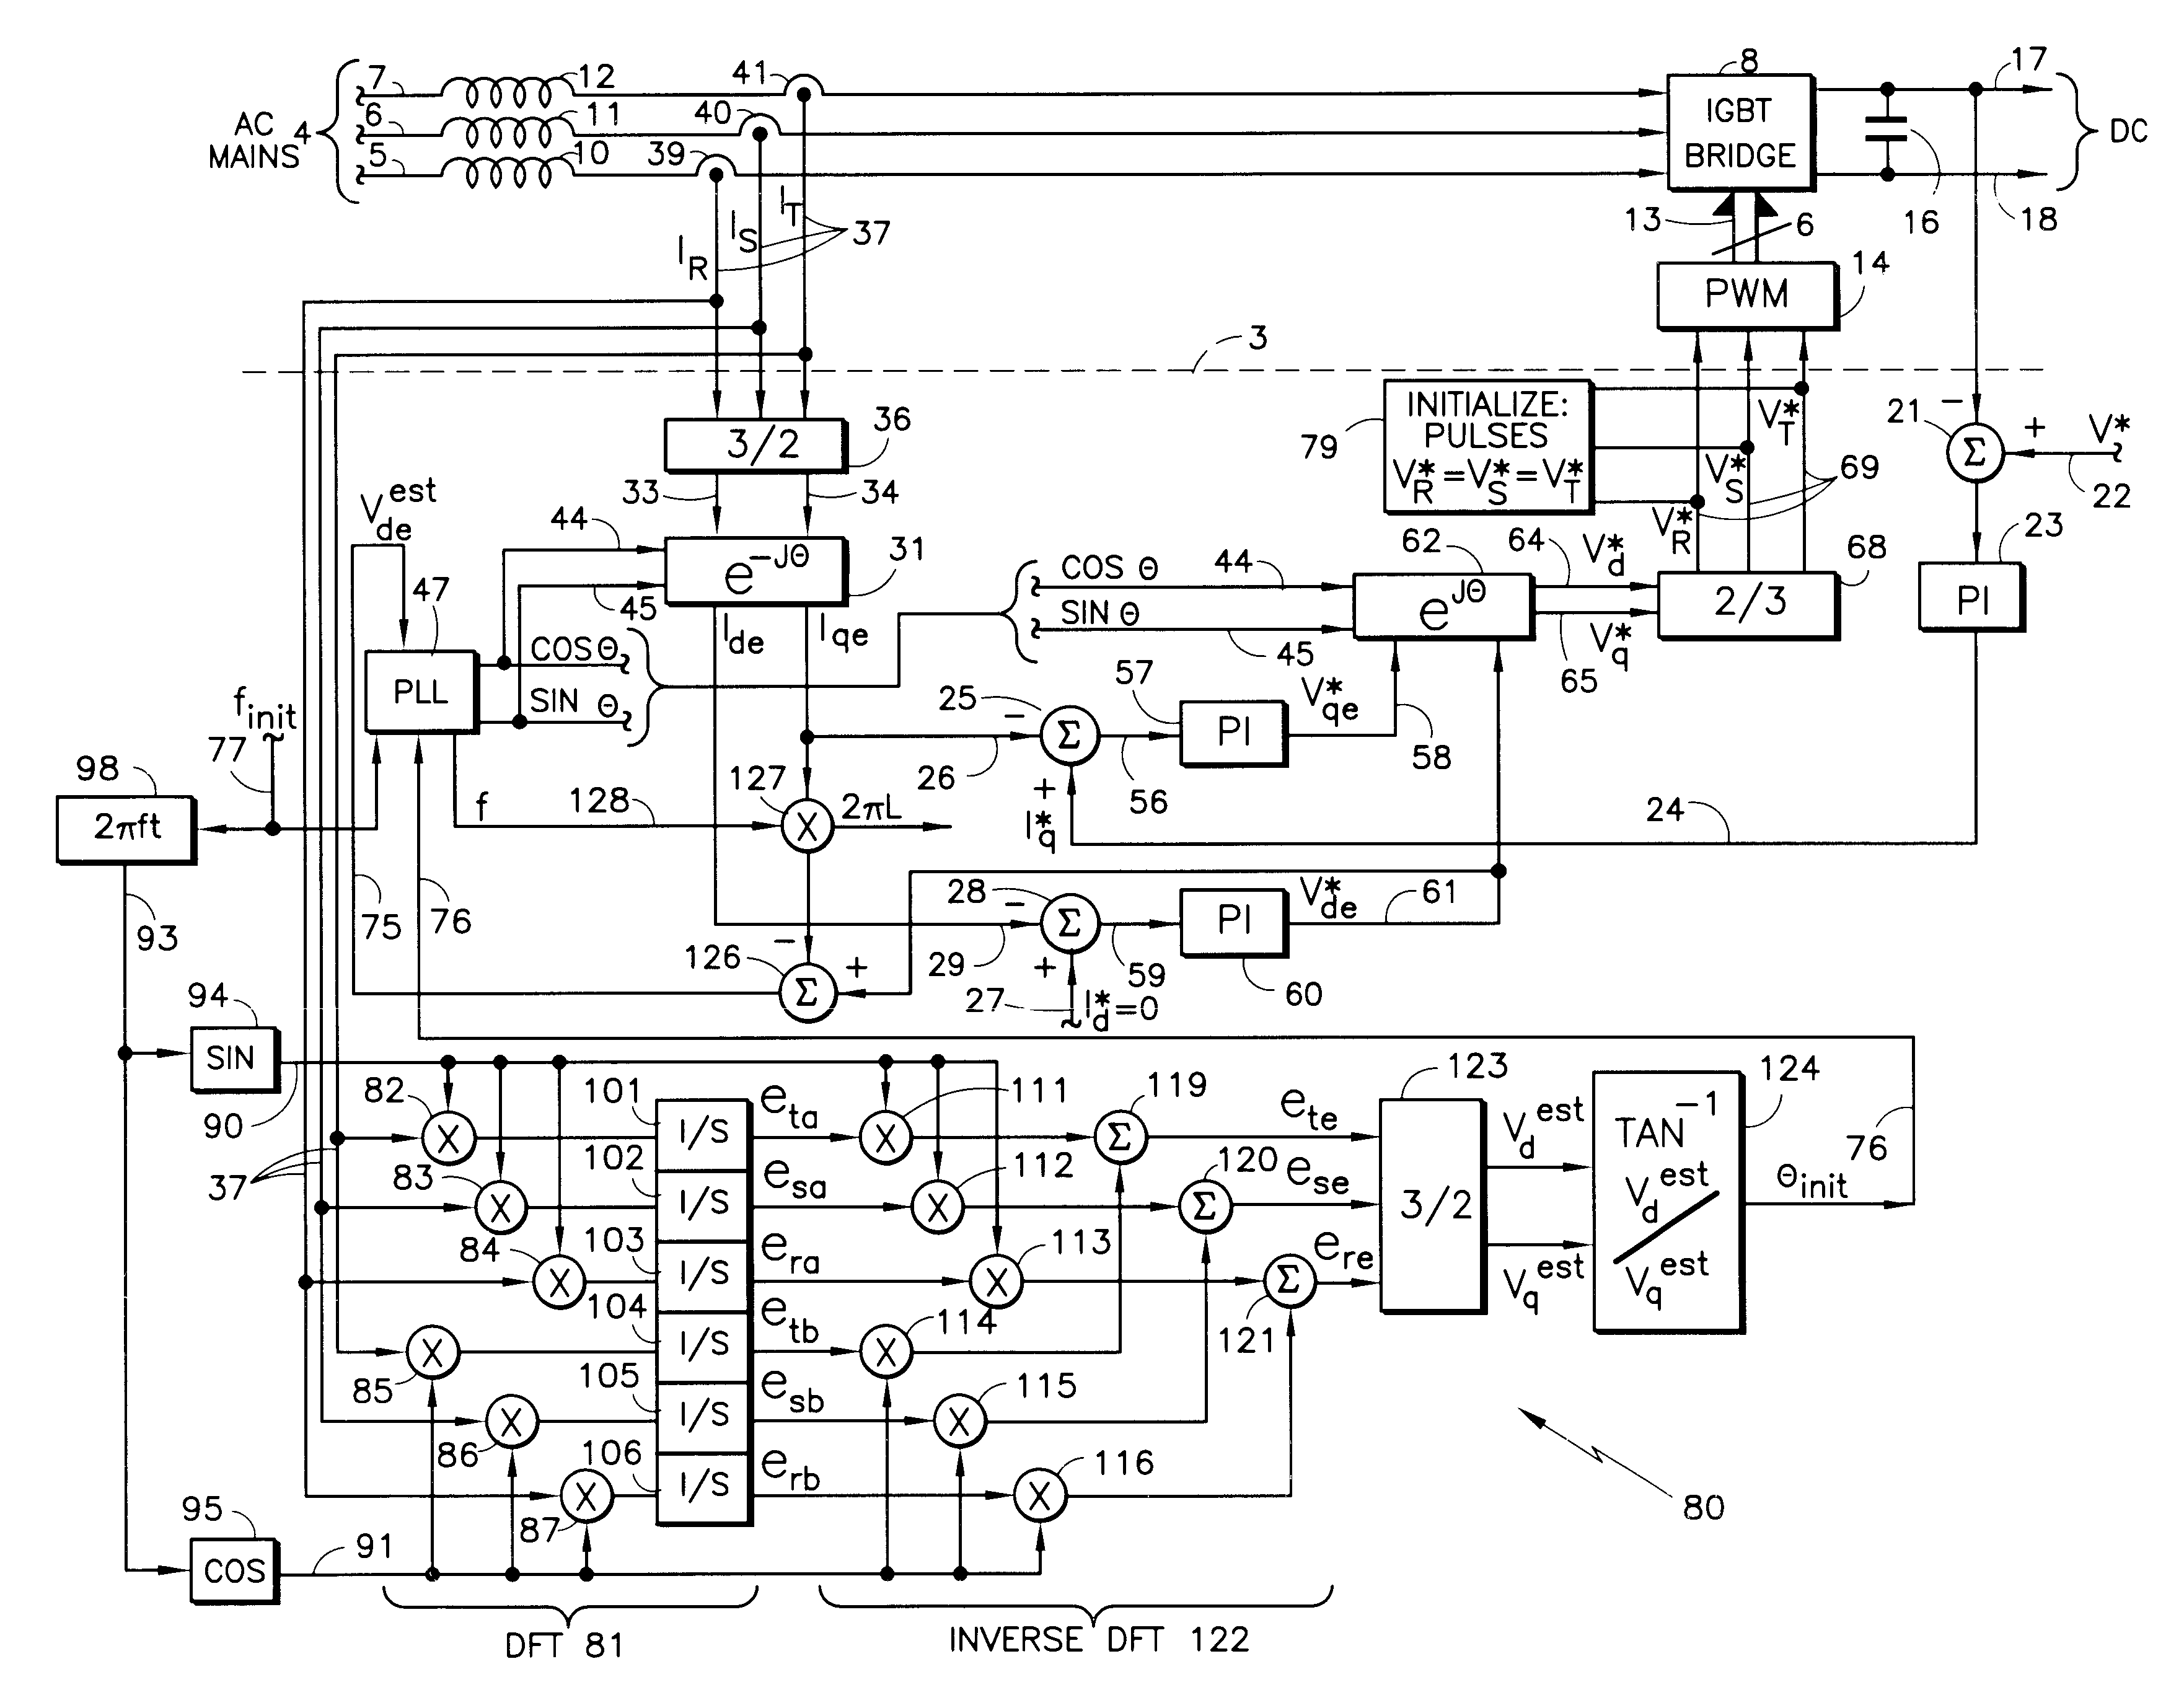 Determining phase of AC mains in PWM controlled converters without voltage sensors